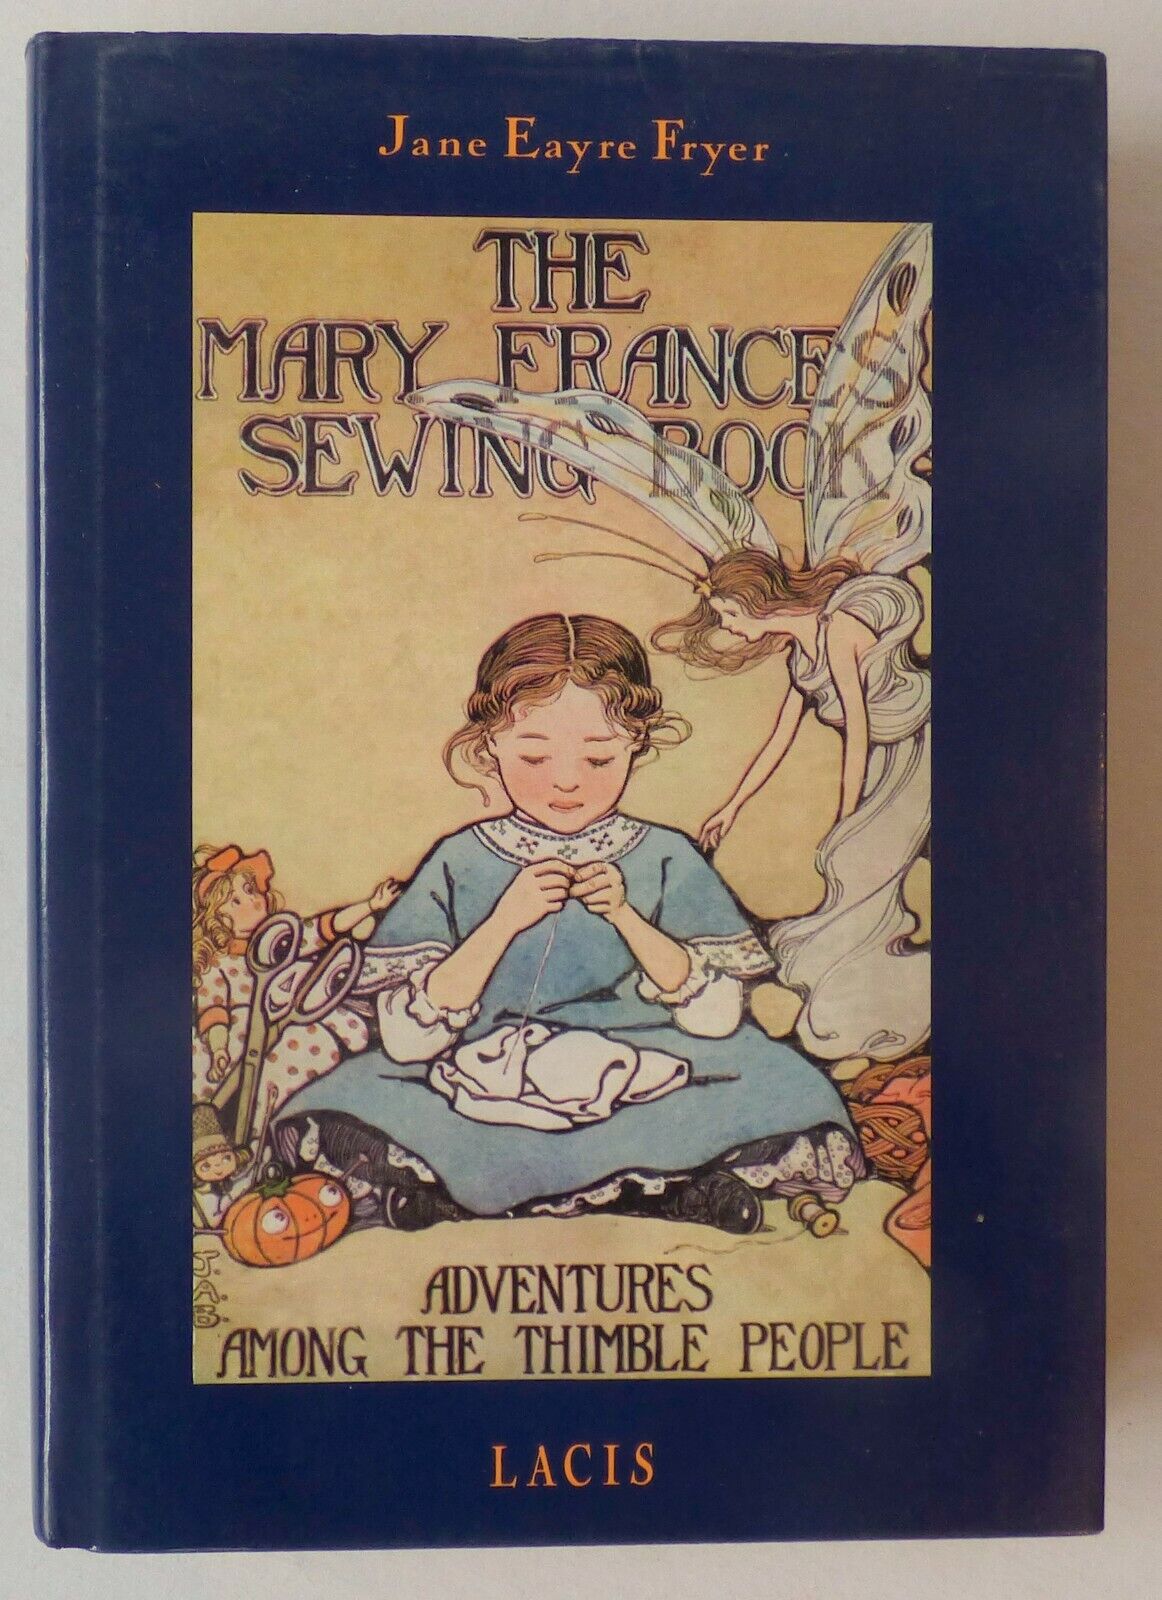 The Mary Frances Sewing Book Jane Eayre Fryer 1997 HB P3077